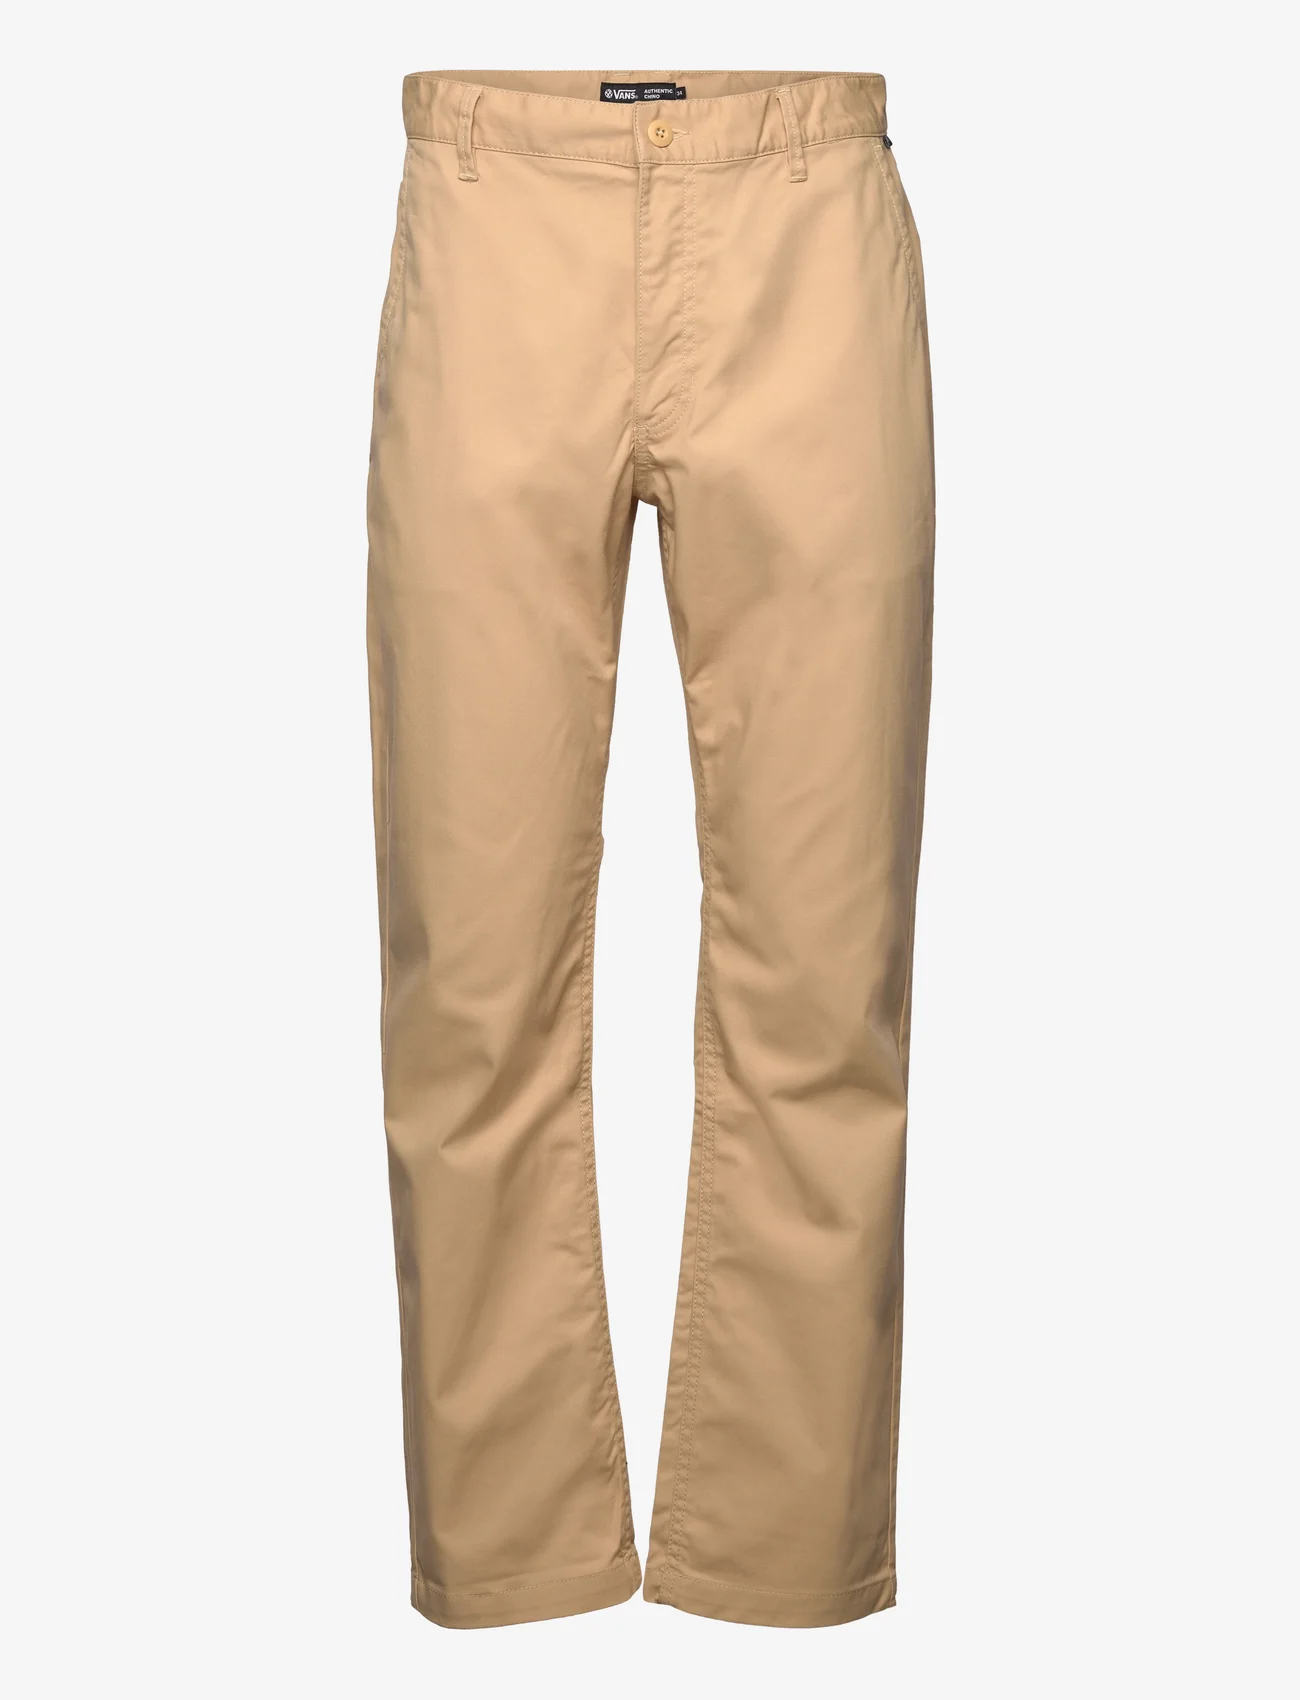 VANS - MN AUTHENTIC CHINO RELAXED PANT - sports pants - taos taupe - 0